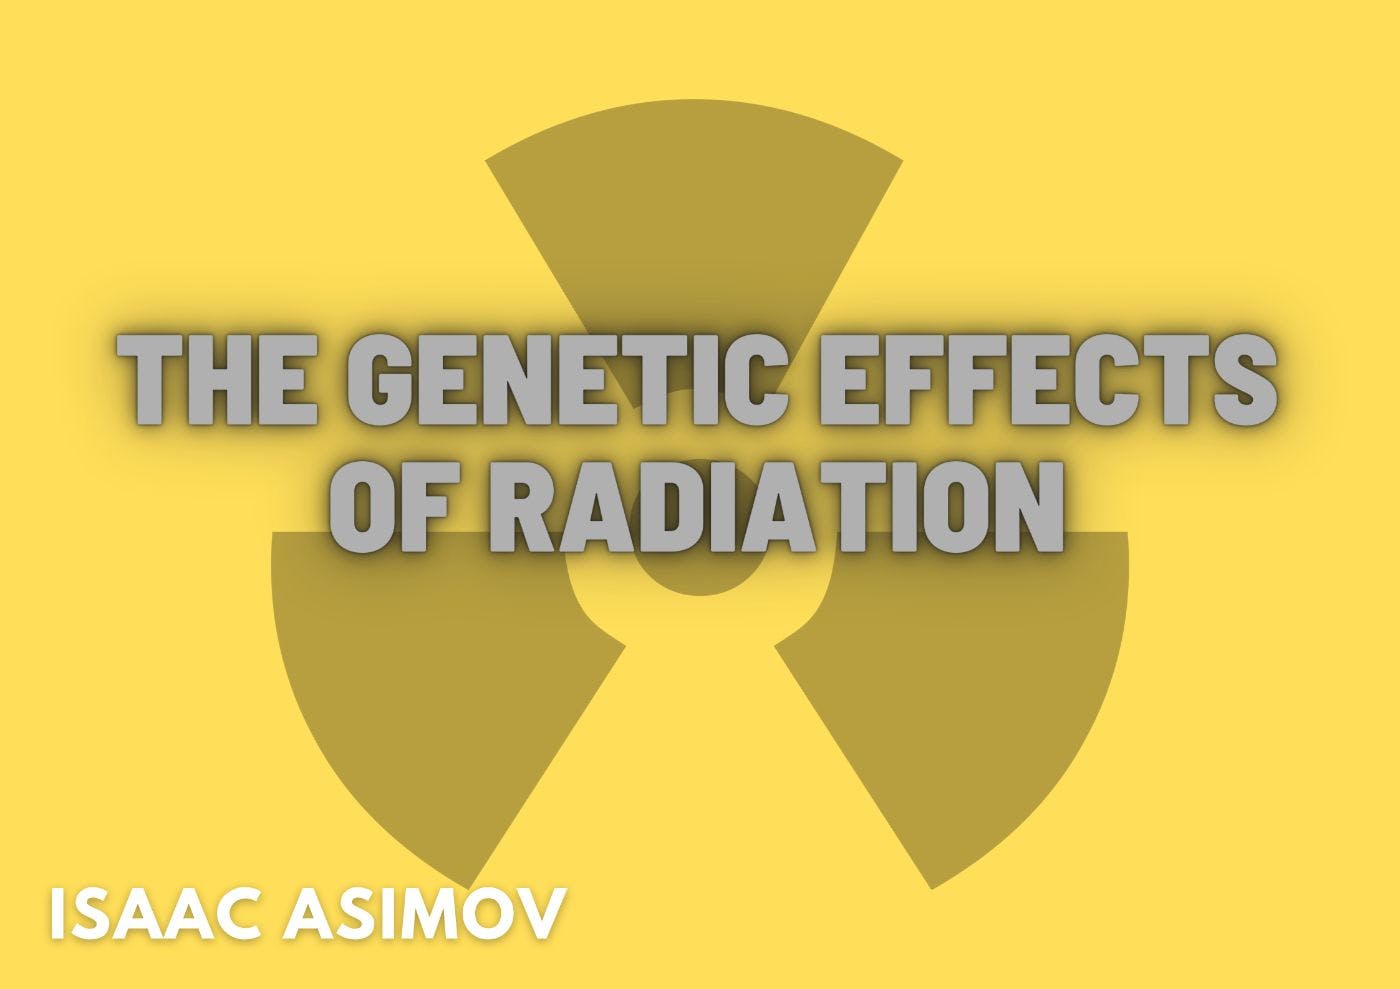 /the-effects-of-radiation-on-mammals feature image